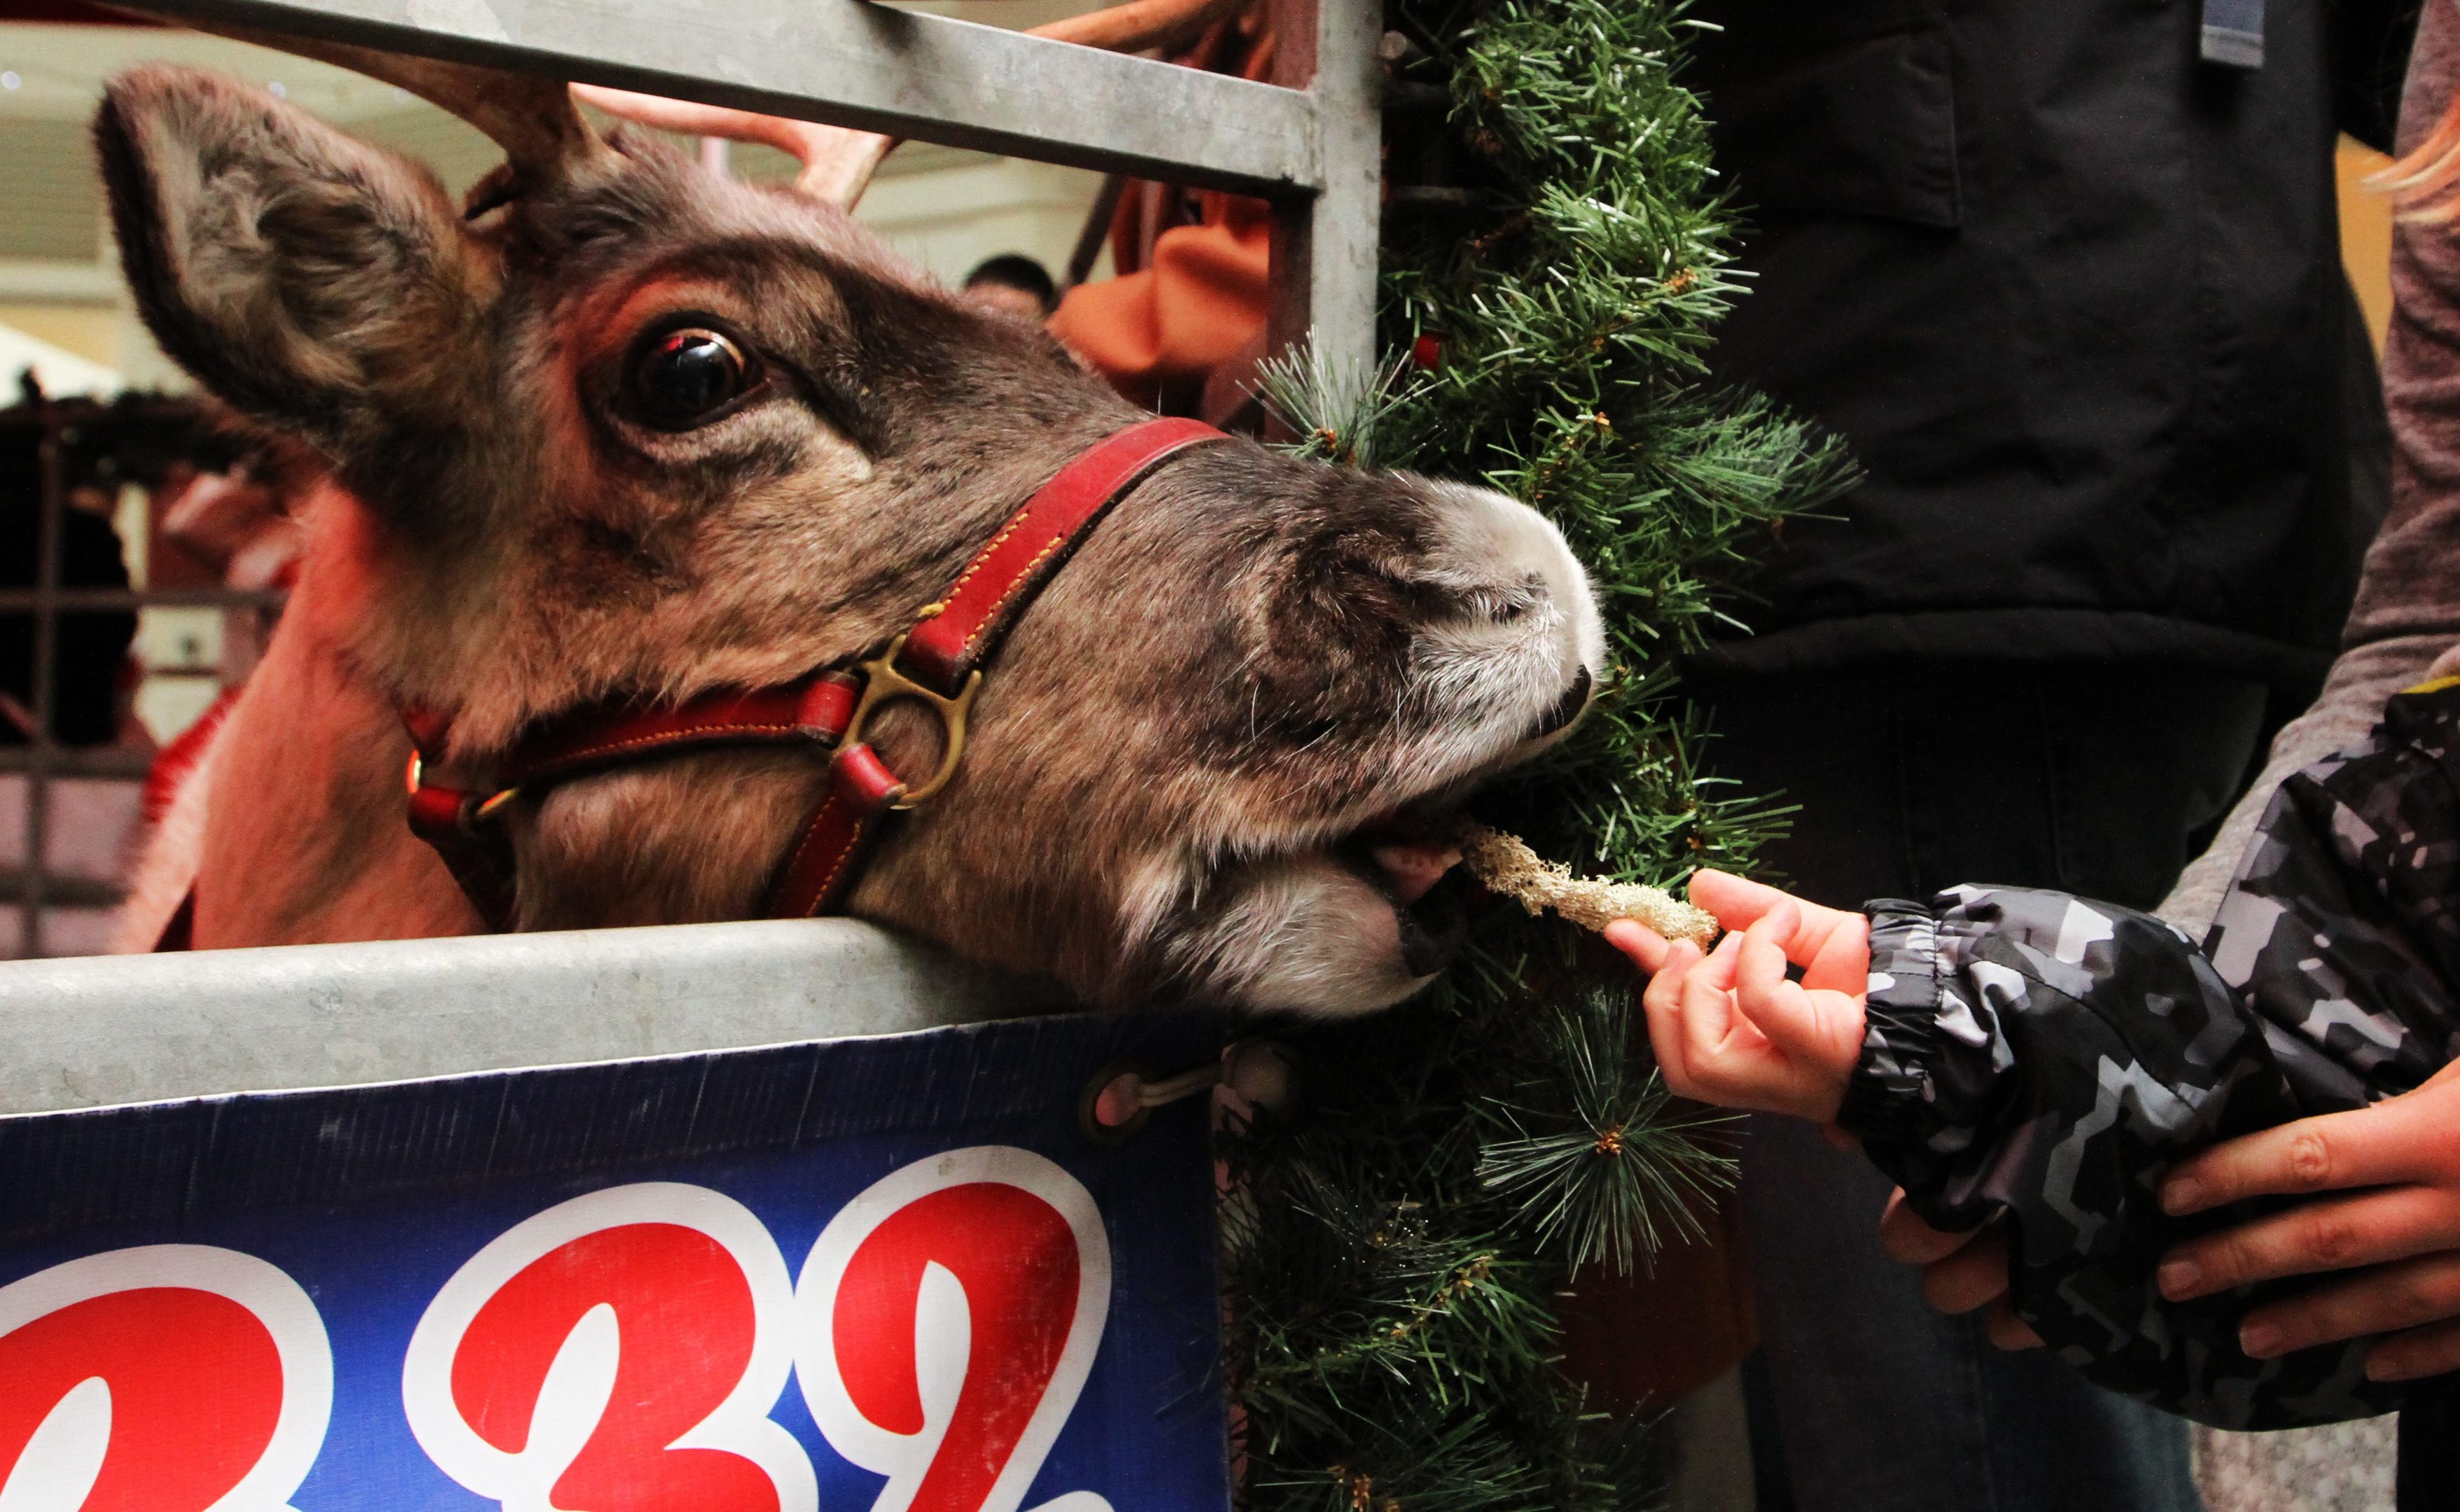 The reindeer being fed by a child in the Wellgate on Thursday.